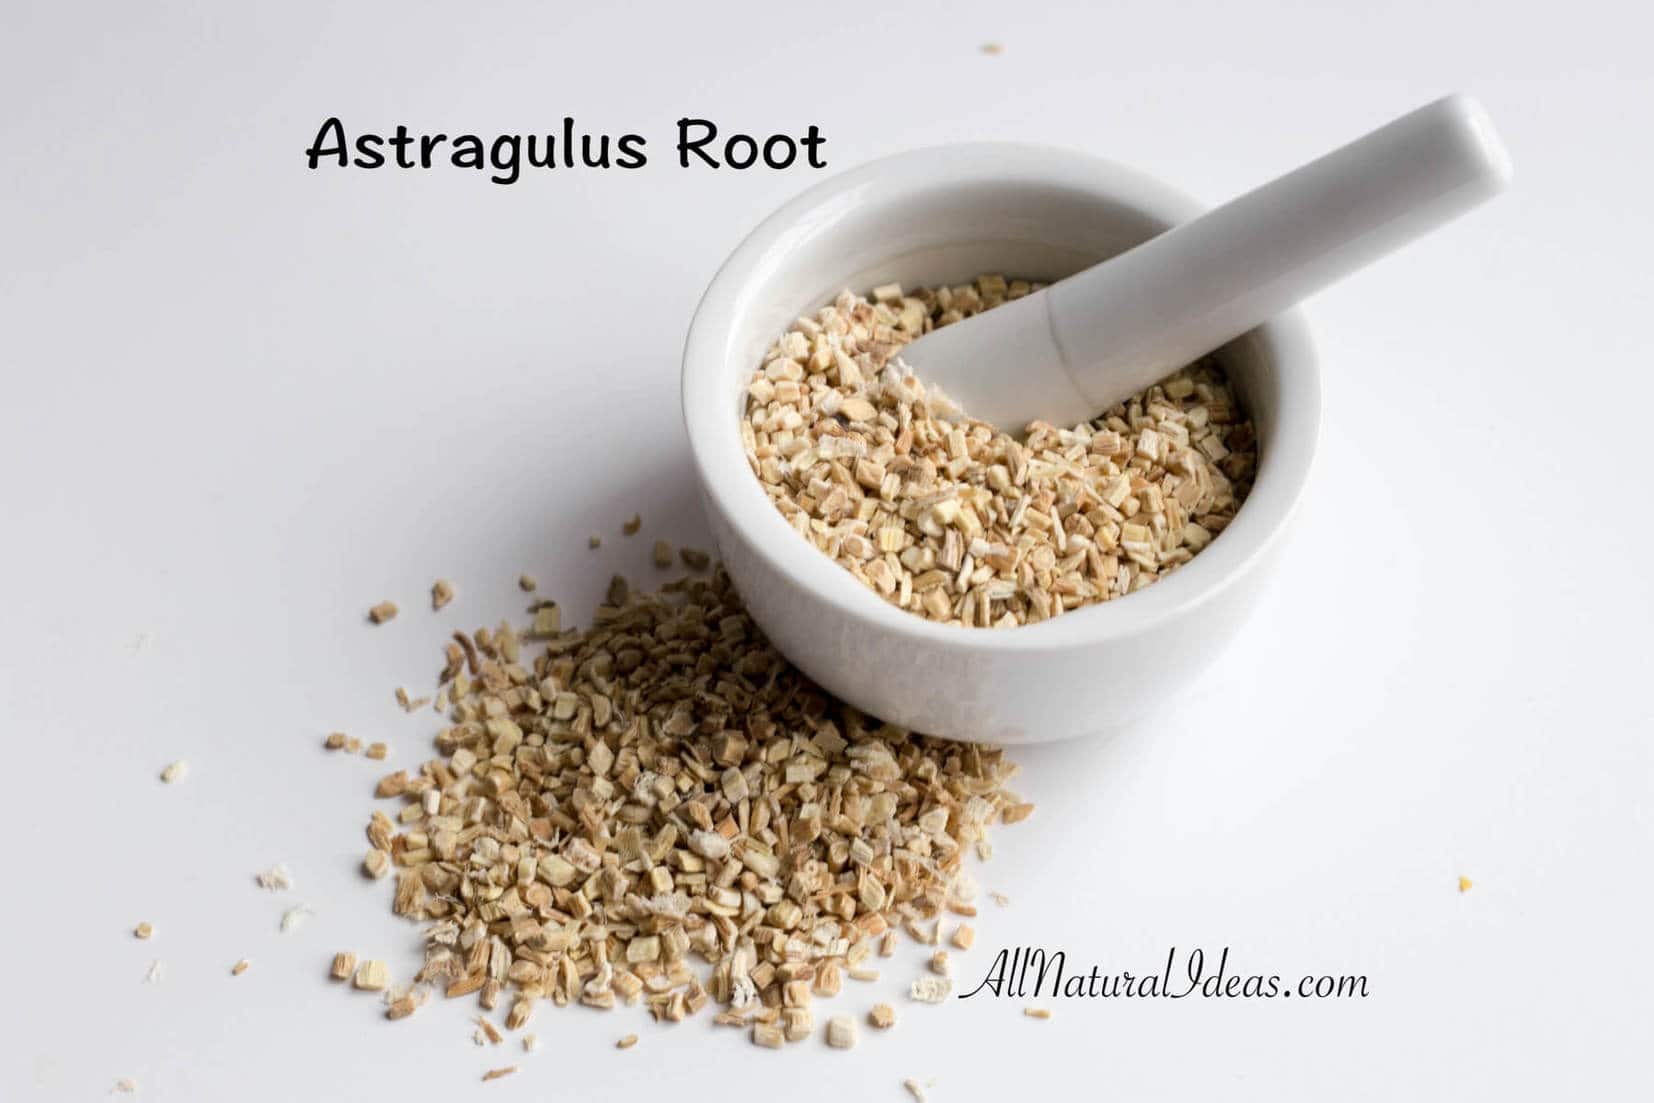 Astragalus root: a natural immune system booster